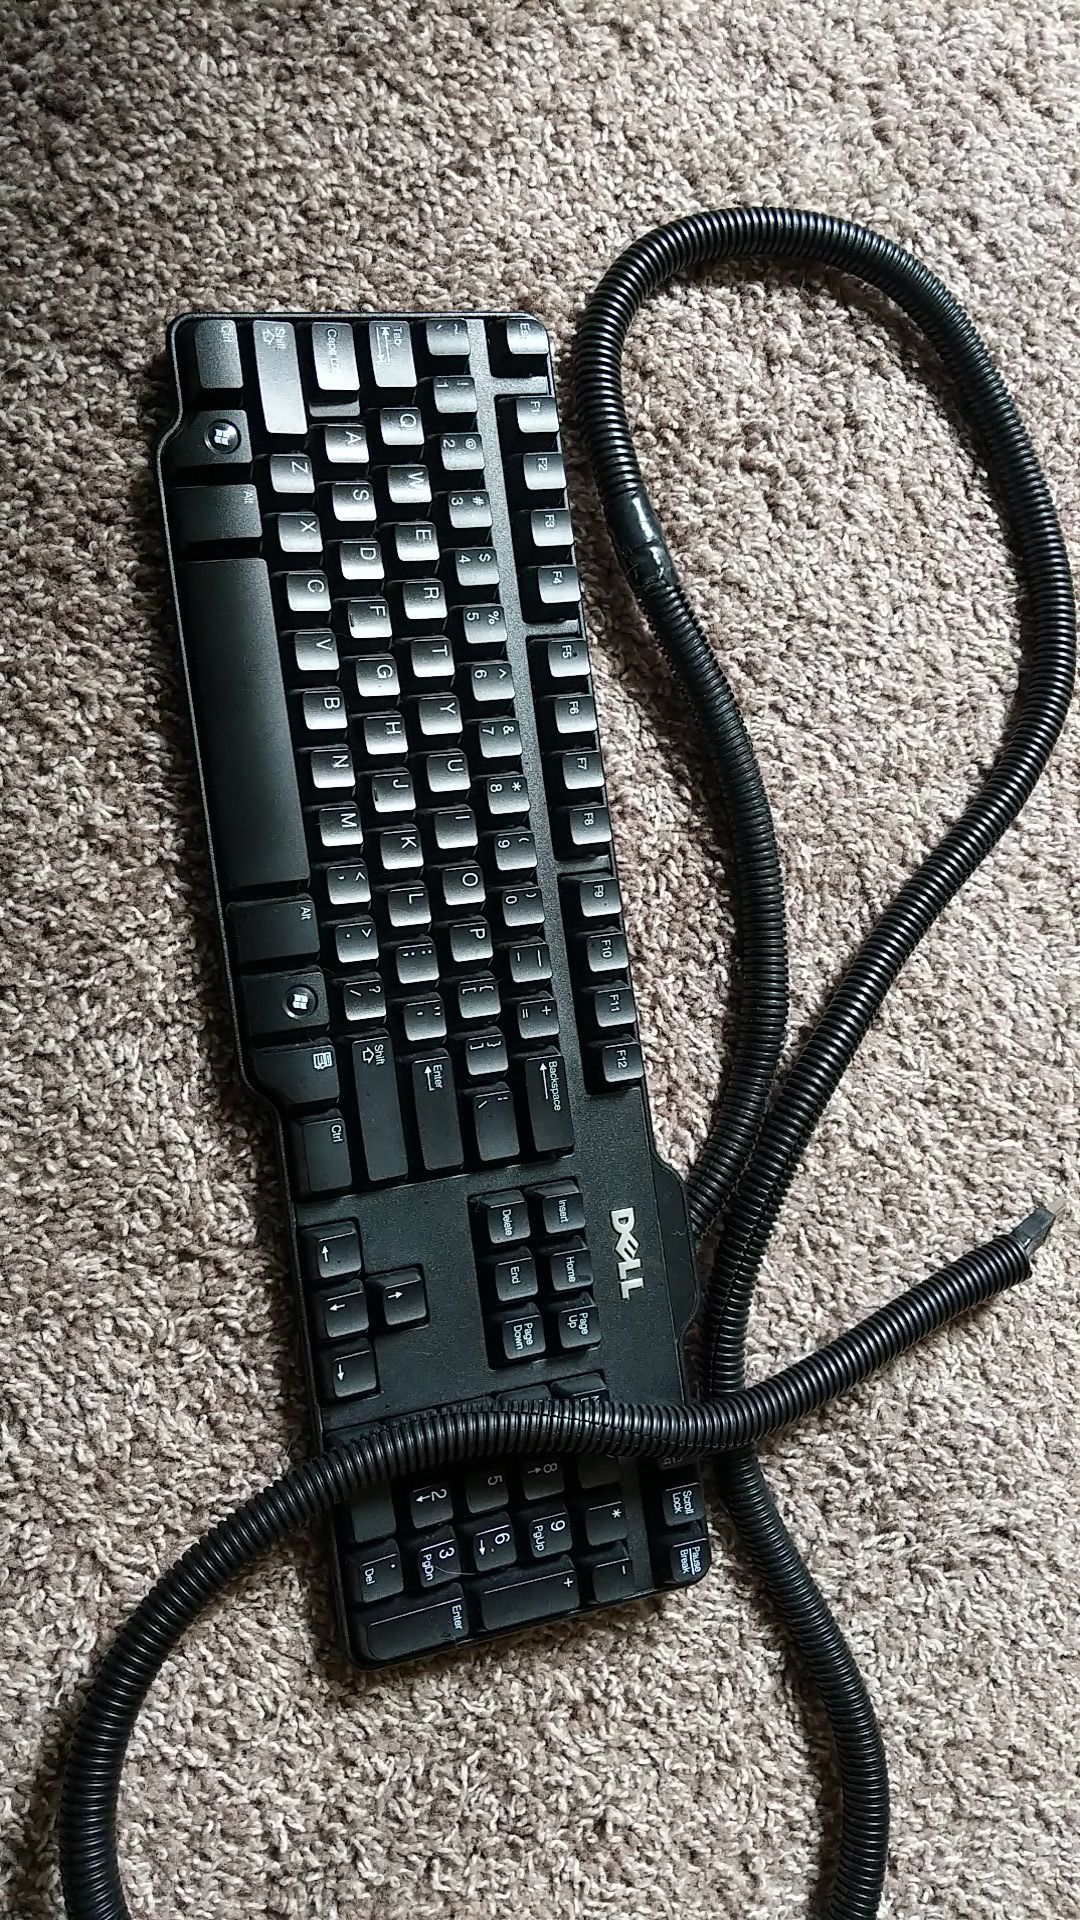 Dell computer keyboard